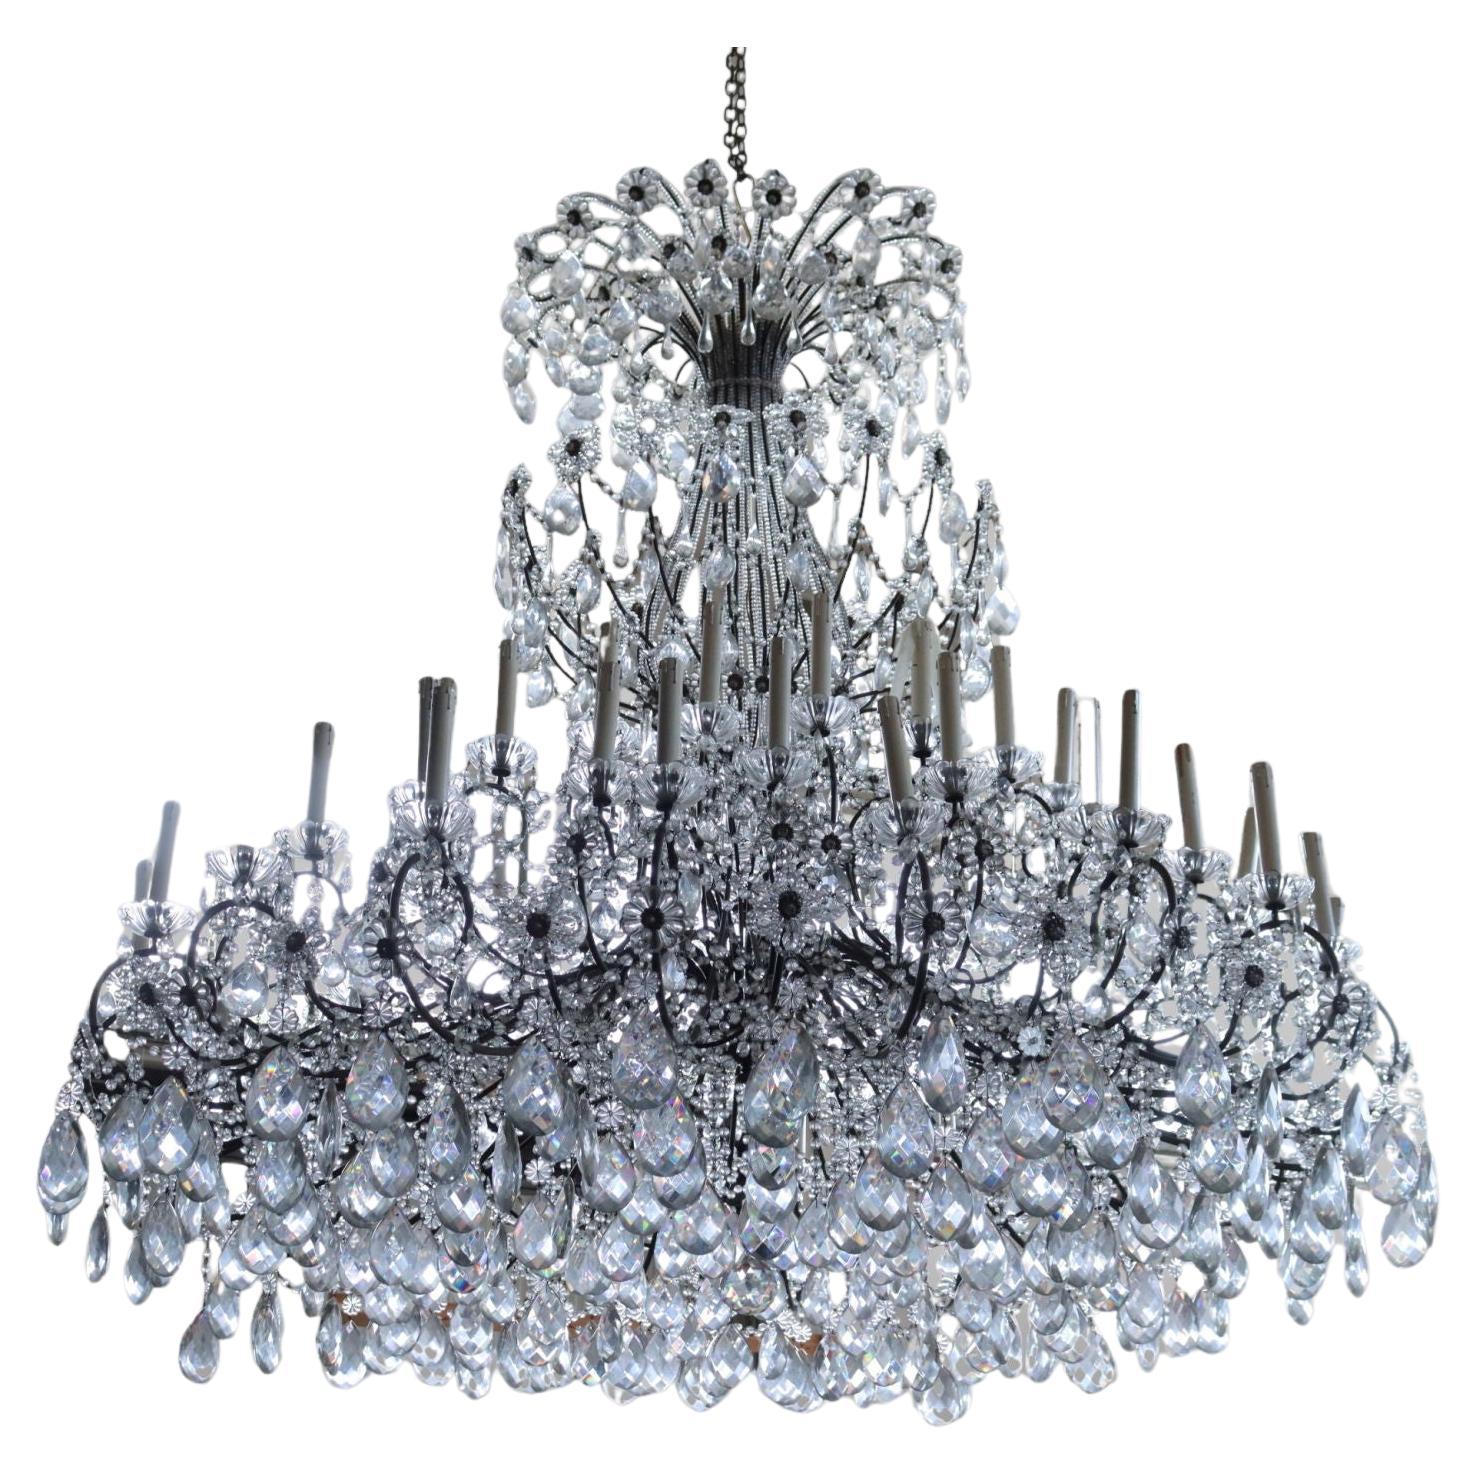 Large Crystal Chandelier Italy 20th Century 